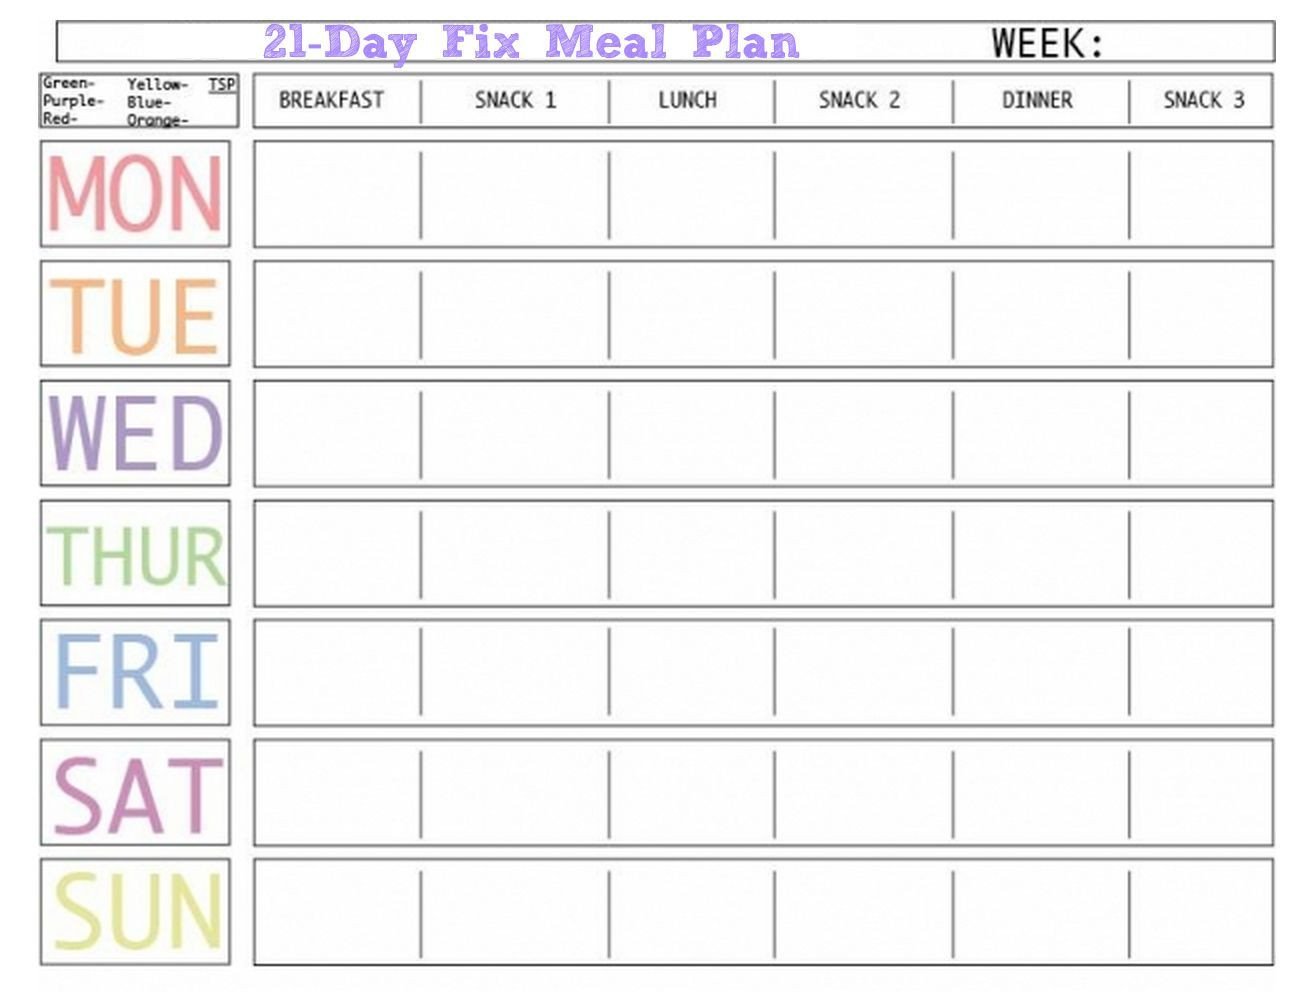 Daily Meal Plan Template Here is A Blank Meal Plan Template You Can Use Diet Plan